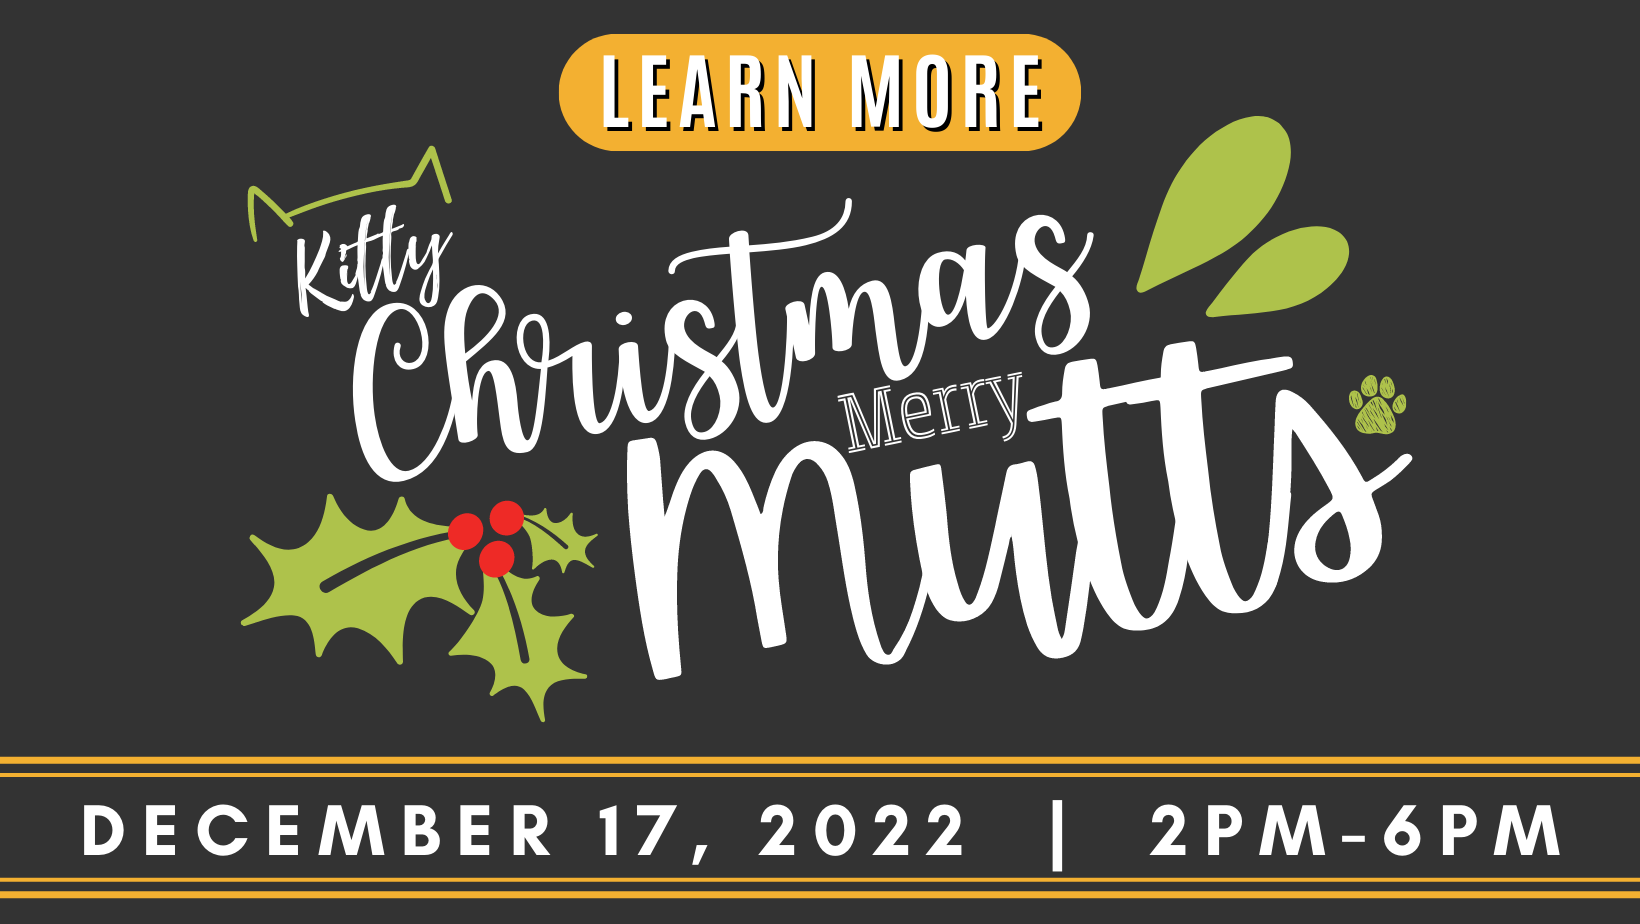 Kitty Christmas, Merry Mutts, December 17th from 2 p.m. to 6 p.m.